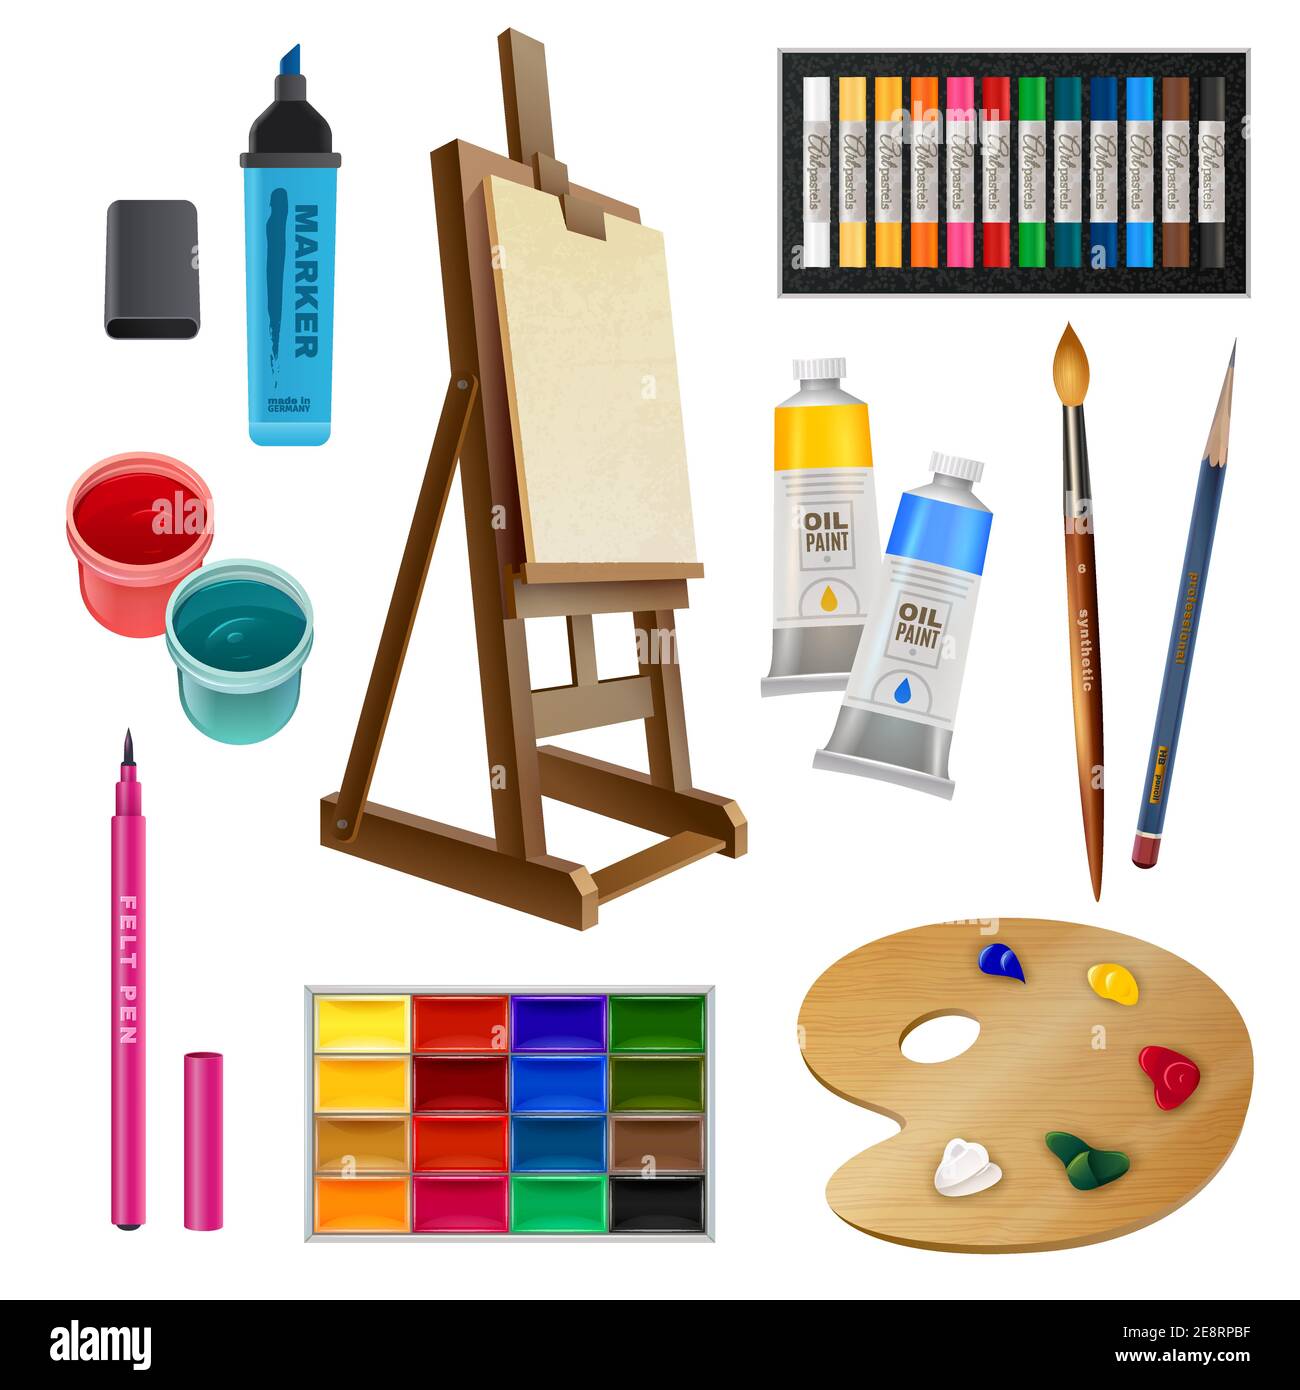 Artist palette with art tools and supplies, vector illustration